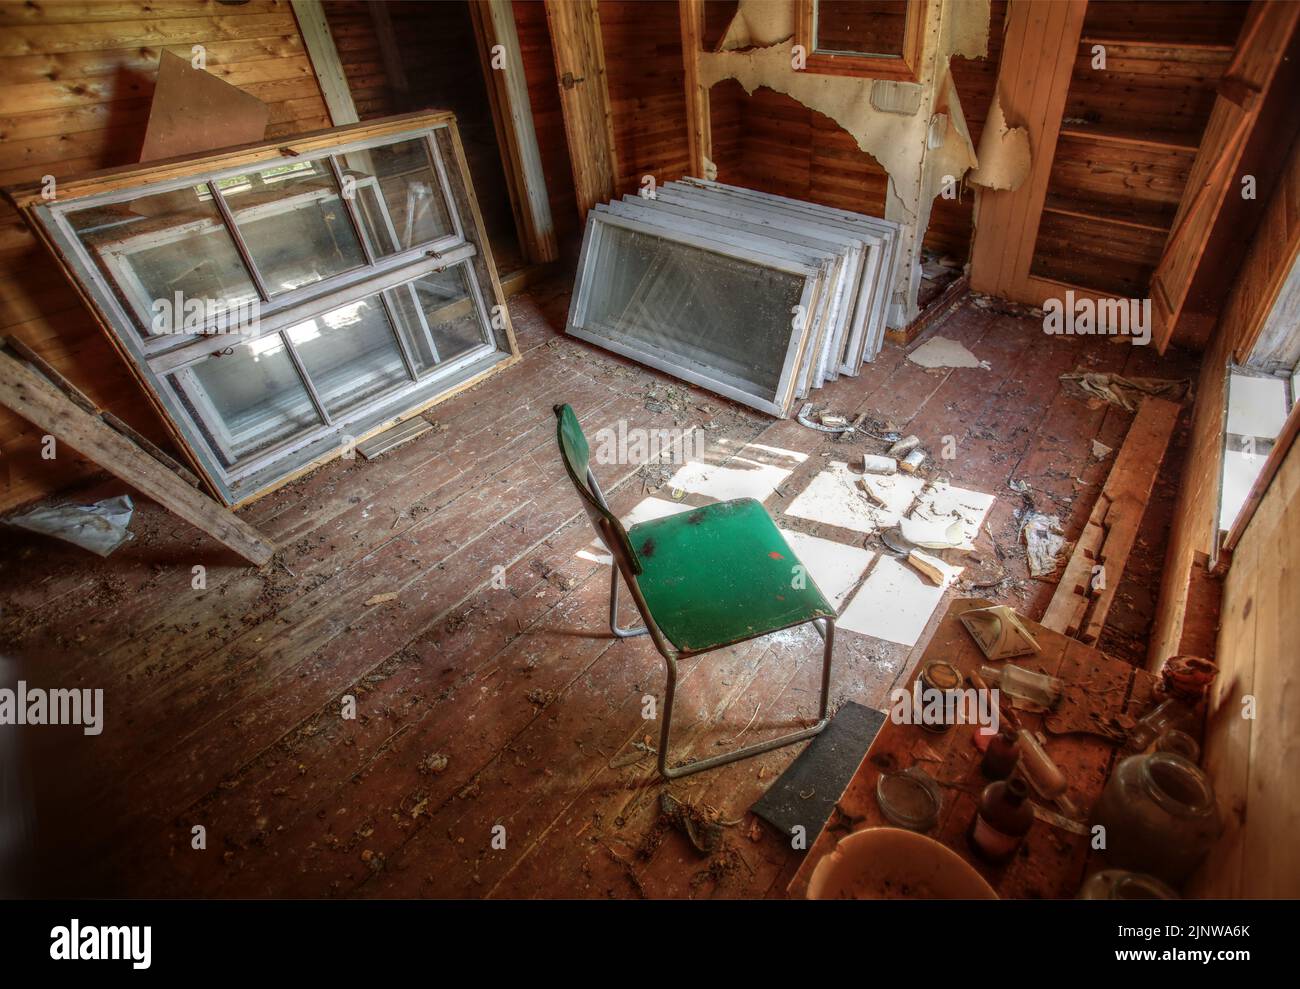 Ruined interior of an old wooden house with chair and disused windows. Stock Photo